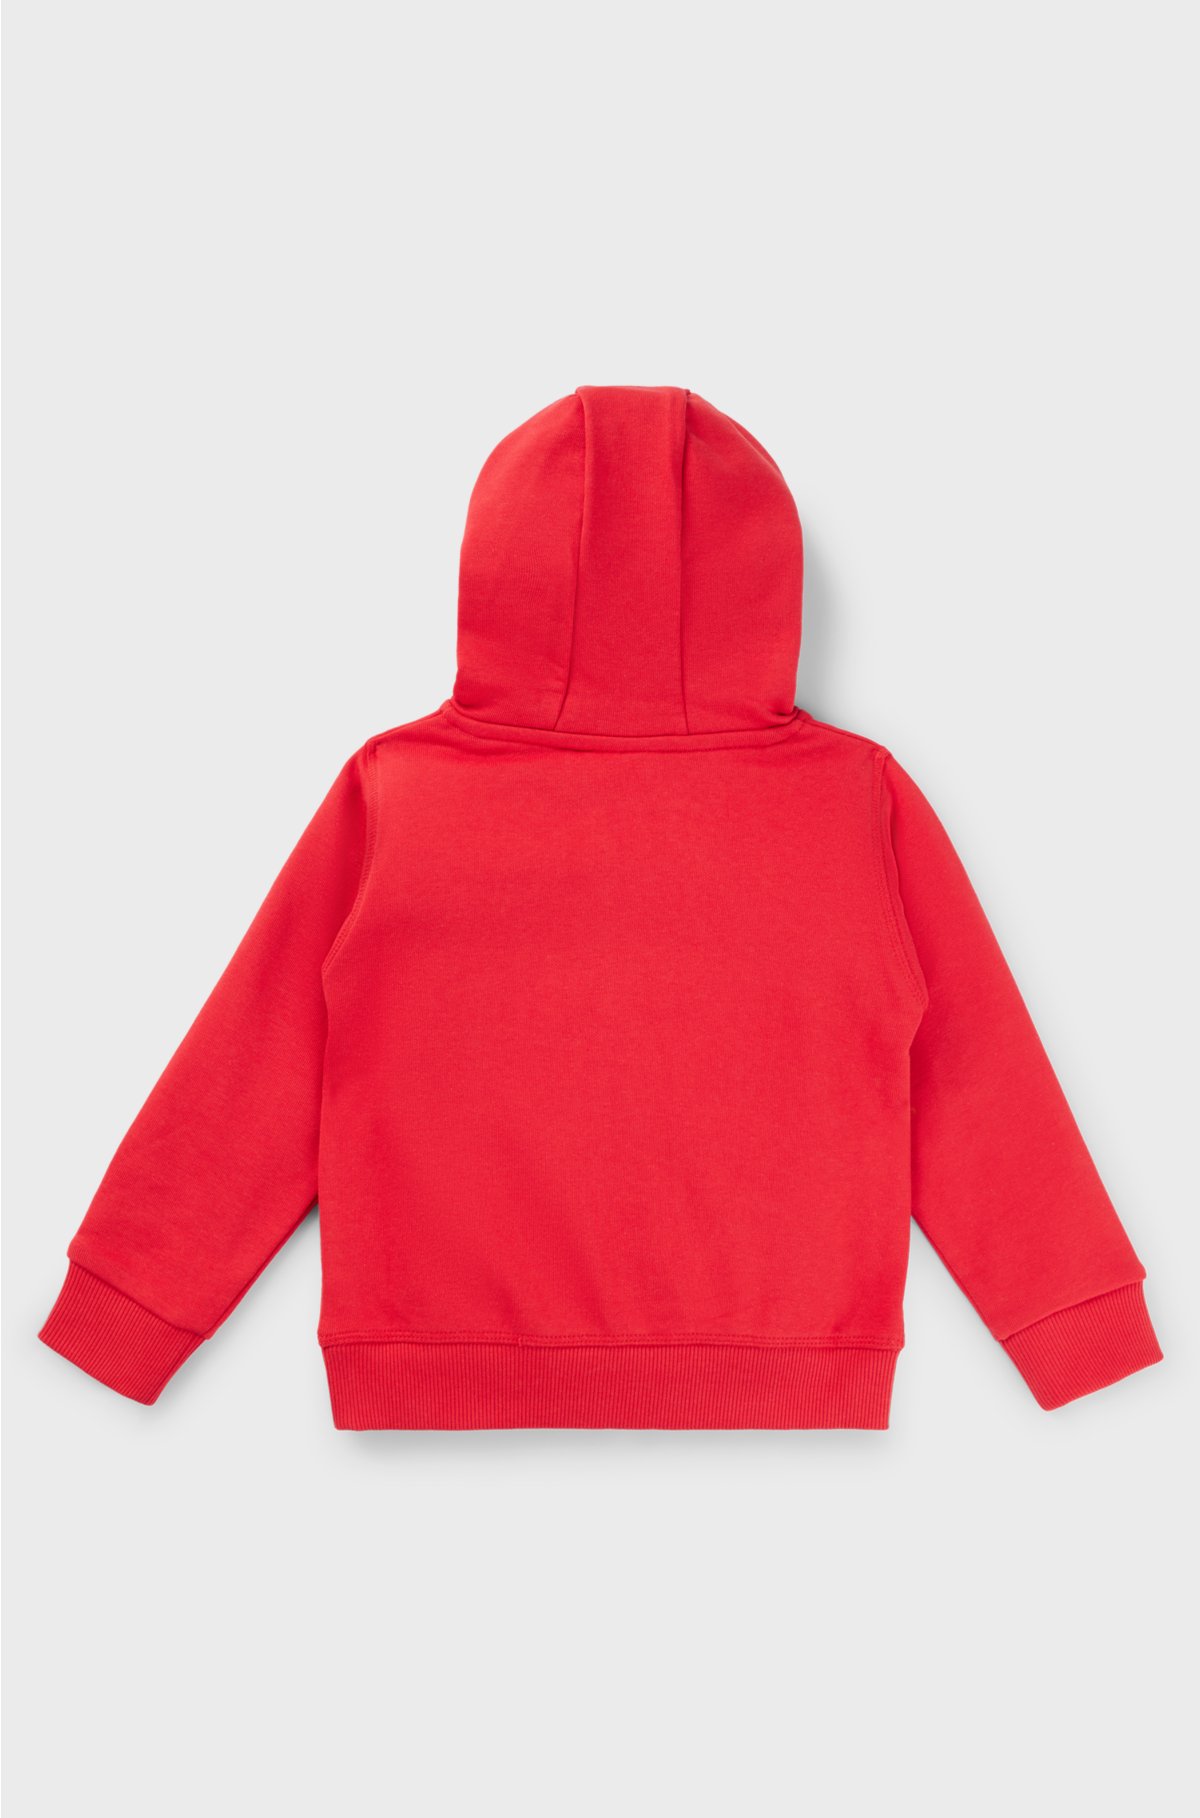 Kids' cotton-blend hoodie with stacked logo, Red